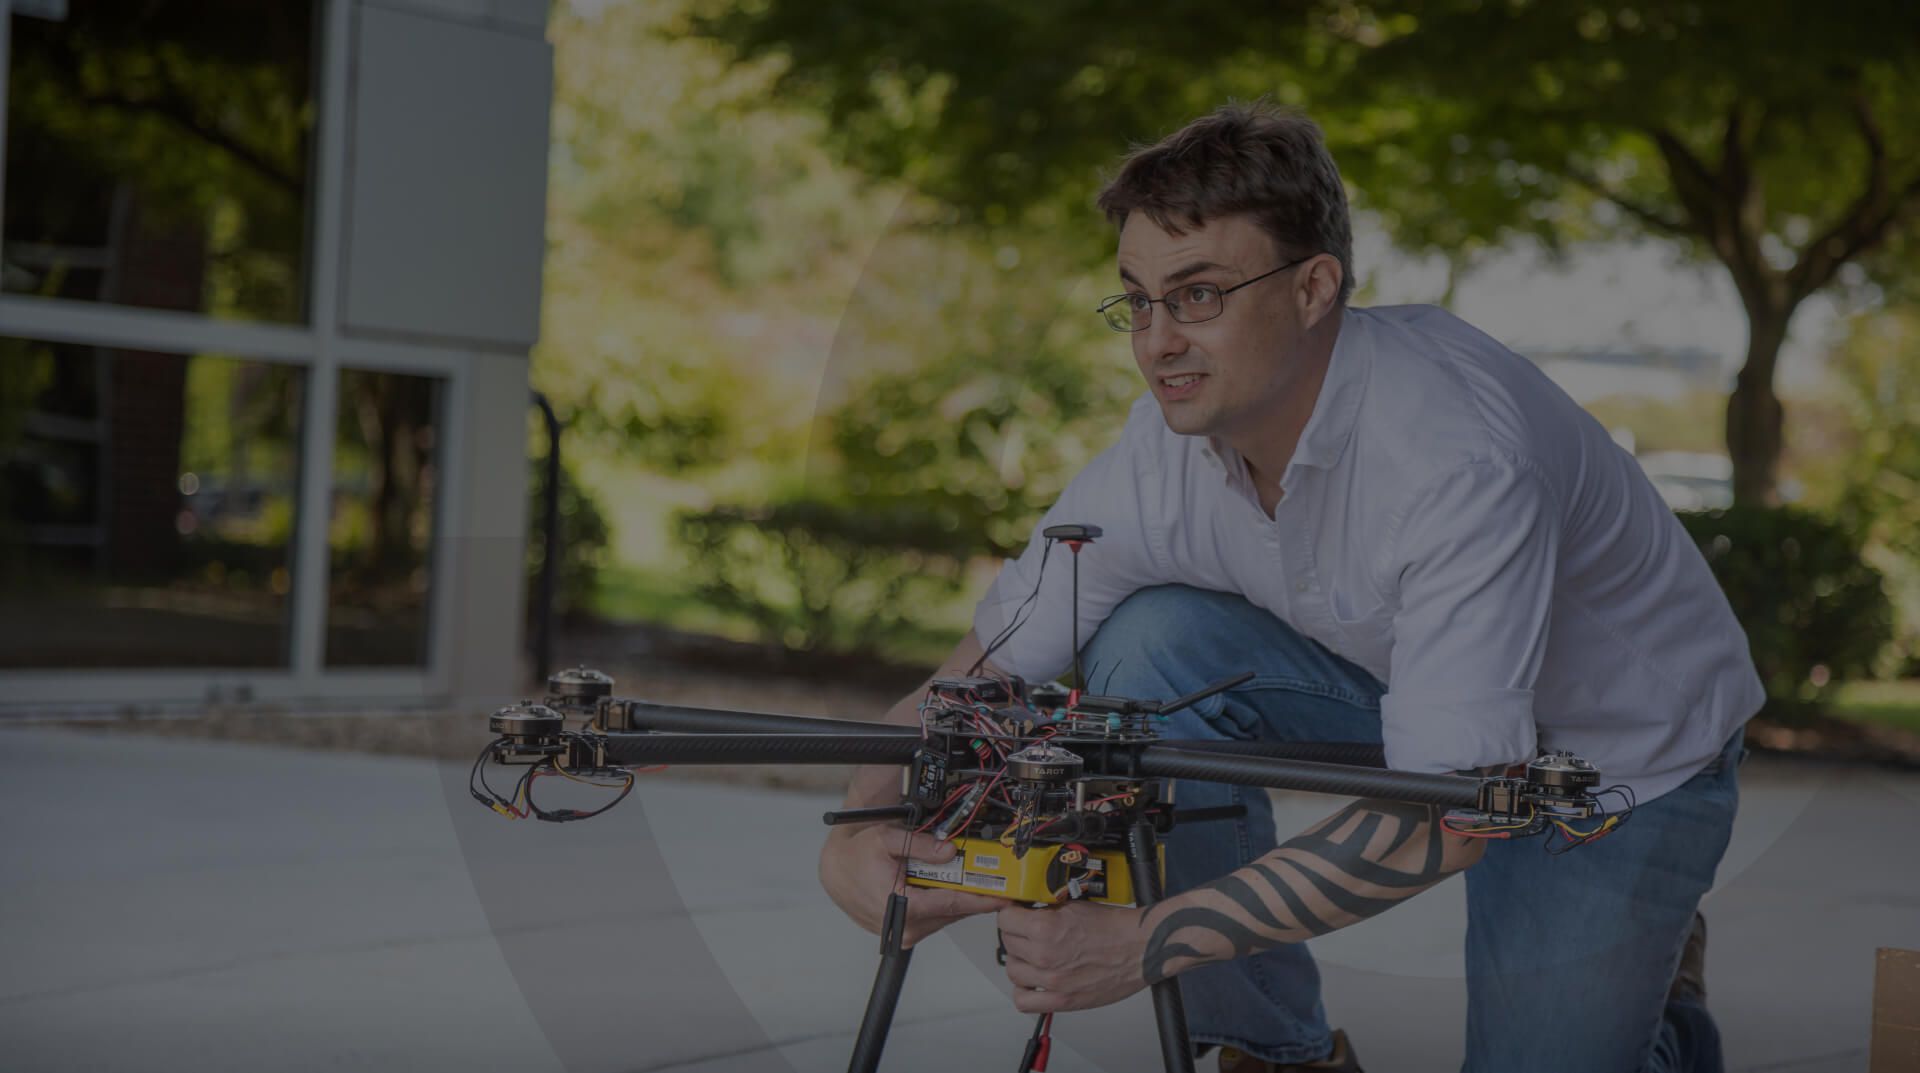 How one startup changed the game in drone technology